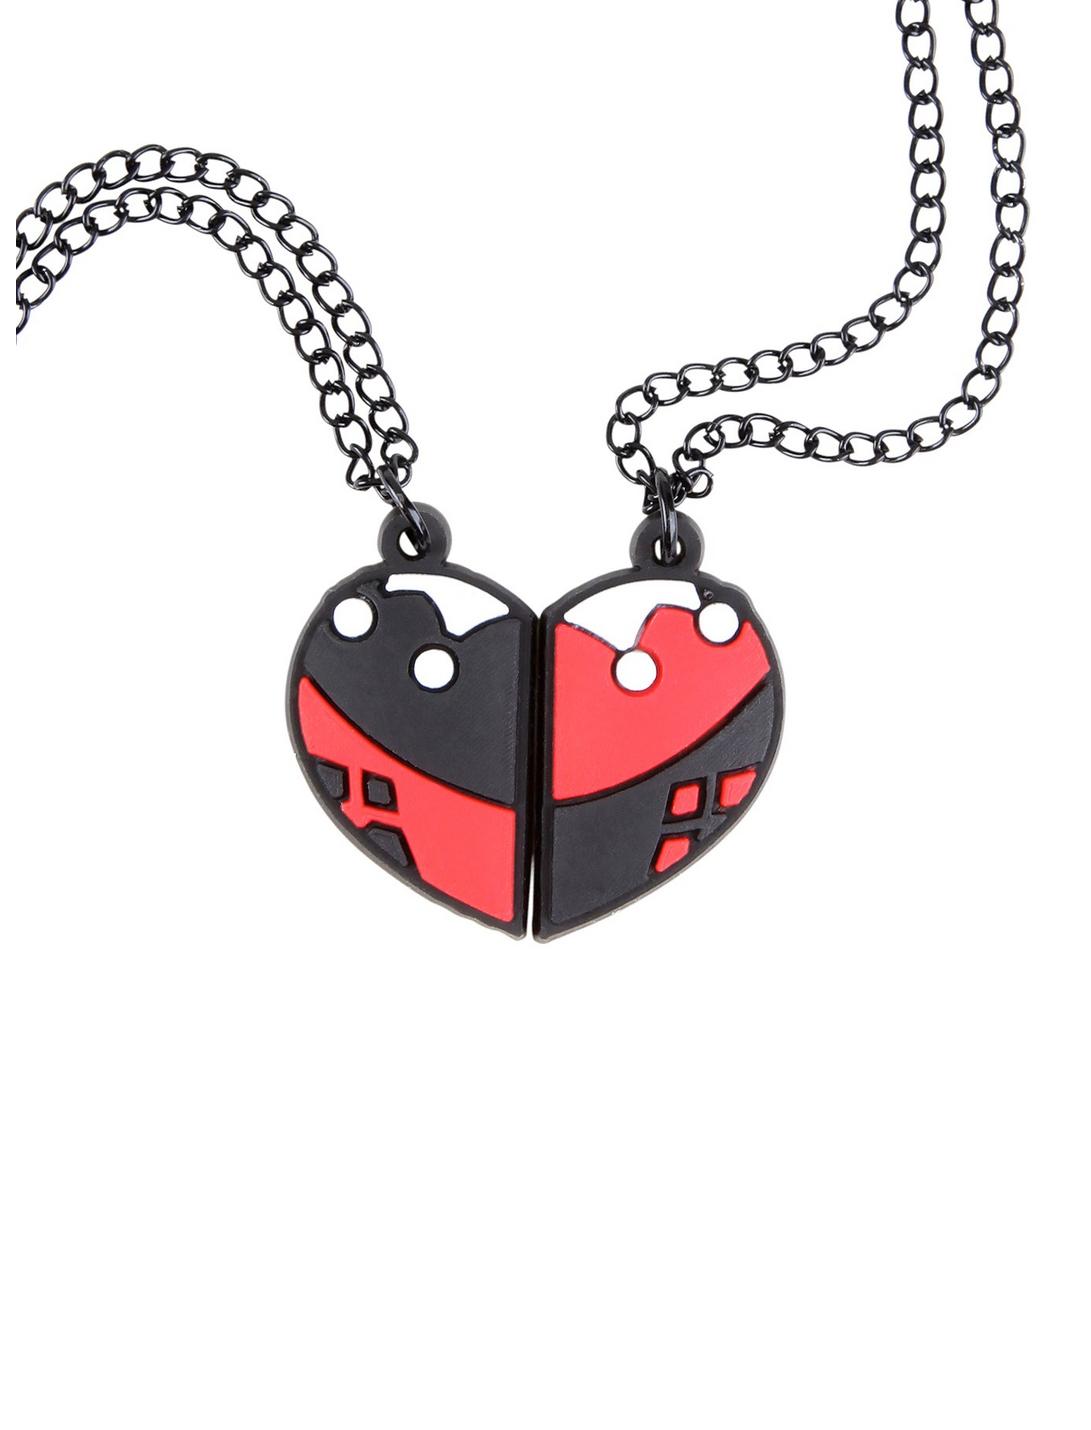 Cute Harley Quinn Suicide Squad DC Comics Accessories Metal Necklace Pendant Charm Gifts for Teen Boy Girl Best Friend/Collection